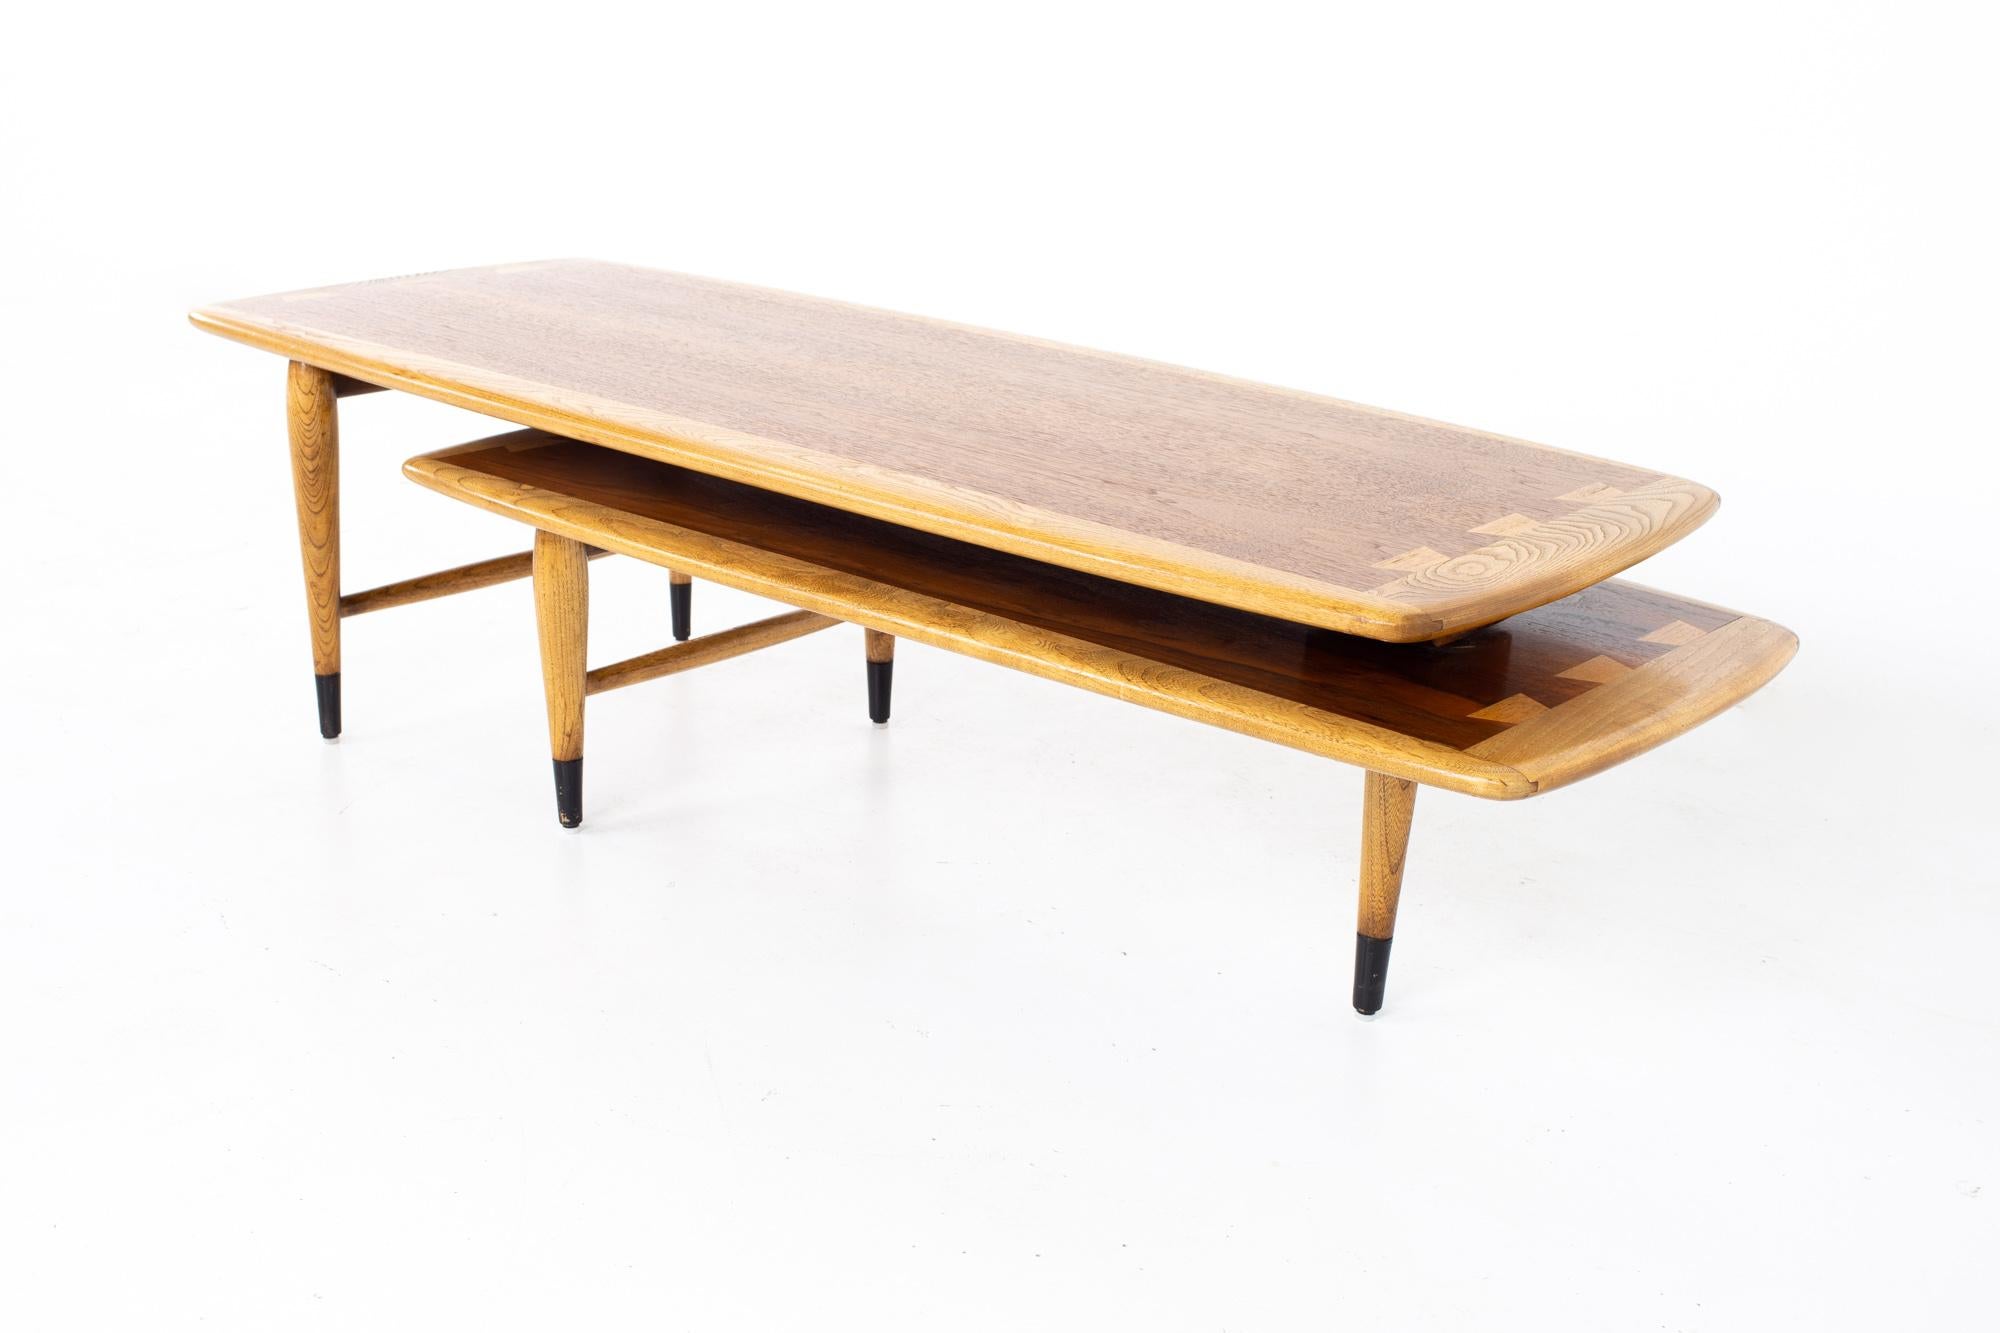 Andre Bus for Lane acclaim mid century walnut and oak dovetail switchblade coffee table
Table measures: 51.5 wide x 19.75 deep x 15 inches high

All pieces of furniture can be had in what we call restored vintage condition. That means the piece